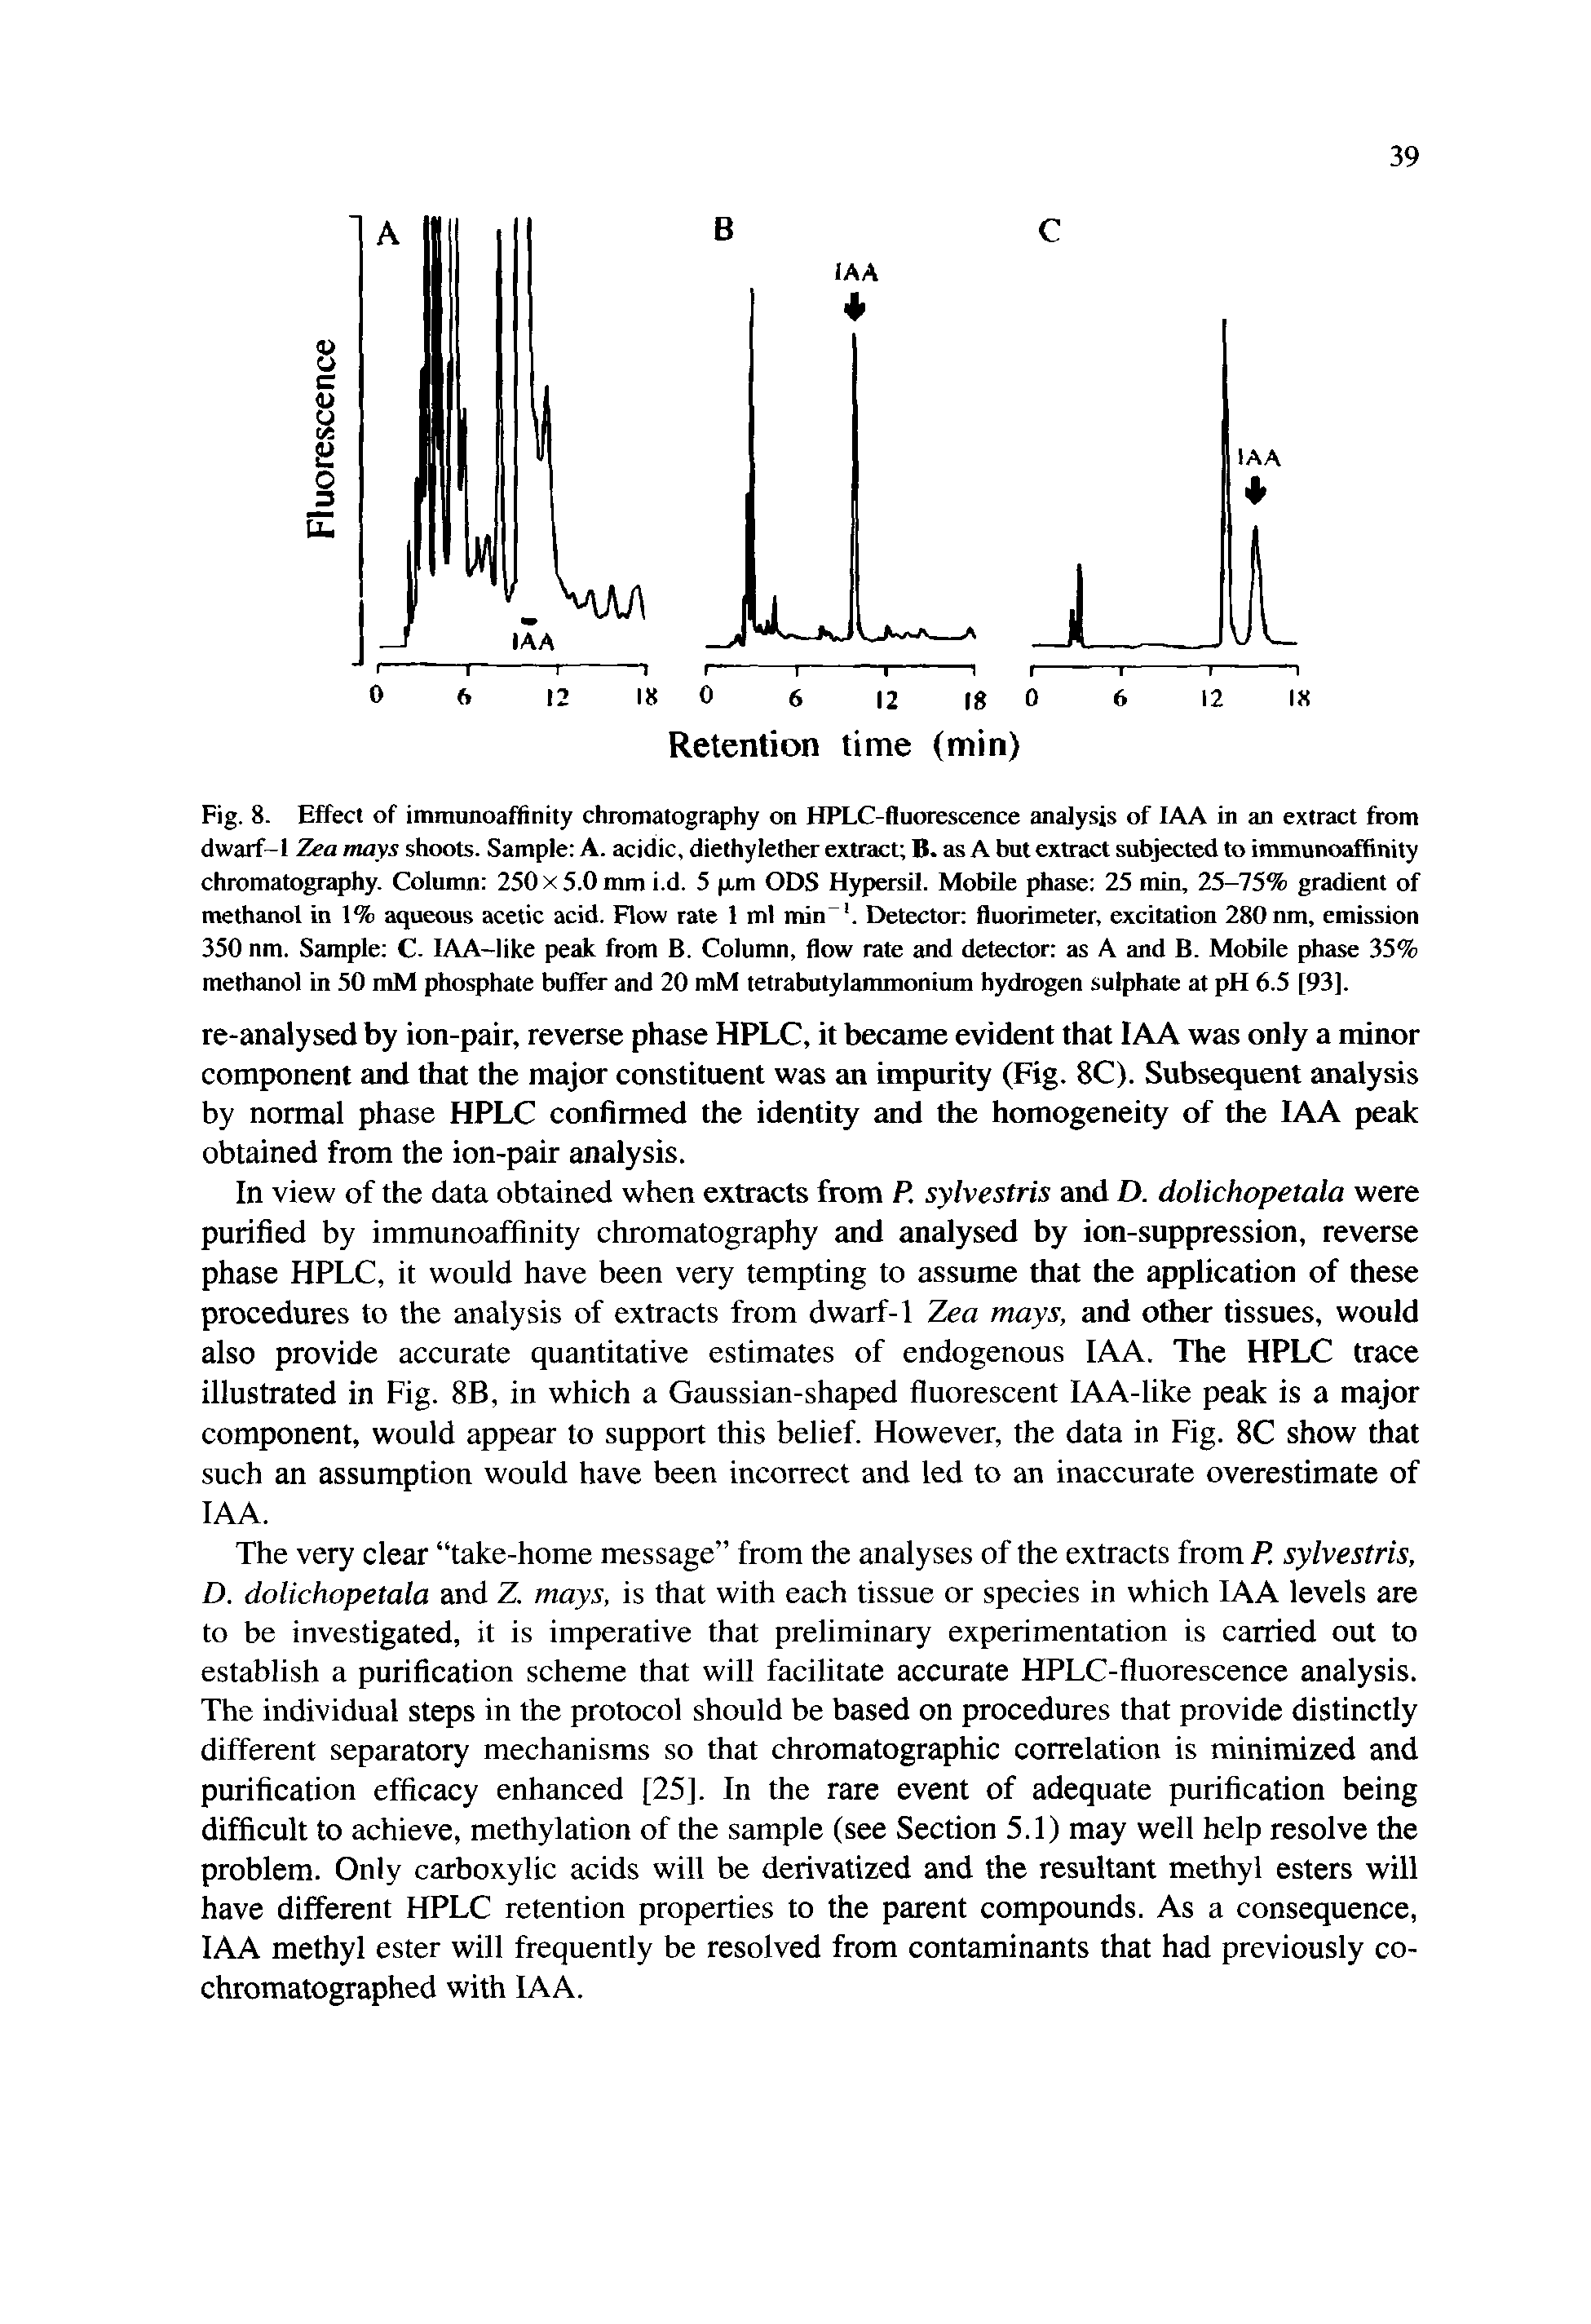 Fig. 8. Effect of imraunoaffinity chromatography on HPLC-fluorescence analysis of lAA in an extract from dwarf-1 Zea mays shoots. Sample A. acidic, diethylether extract B. as A but extract subjected to immunoaffinity chromatography. Column 250x5.0 mm i.d. 5 p,m ODS Hypersil. Mobile phase 25 rain, 25-75% gradient of methanol in 1% aqueous acetic acid. Flow rate 1 ml min. Detector fluorimeter, excitation 280 nm, emission 350 nm. Sample C. lAA-like peak from B. Column, flow rate and detector as A and B. Mobile phase 35% methanol in 50 mM phosphate buffer and 20 mM tetrabutylammonium hydrogen sulphate at pH 6.5 [93].